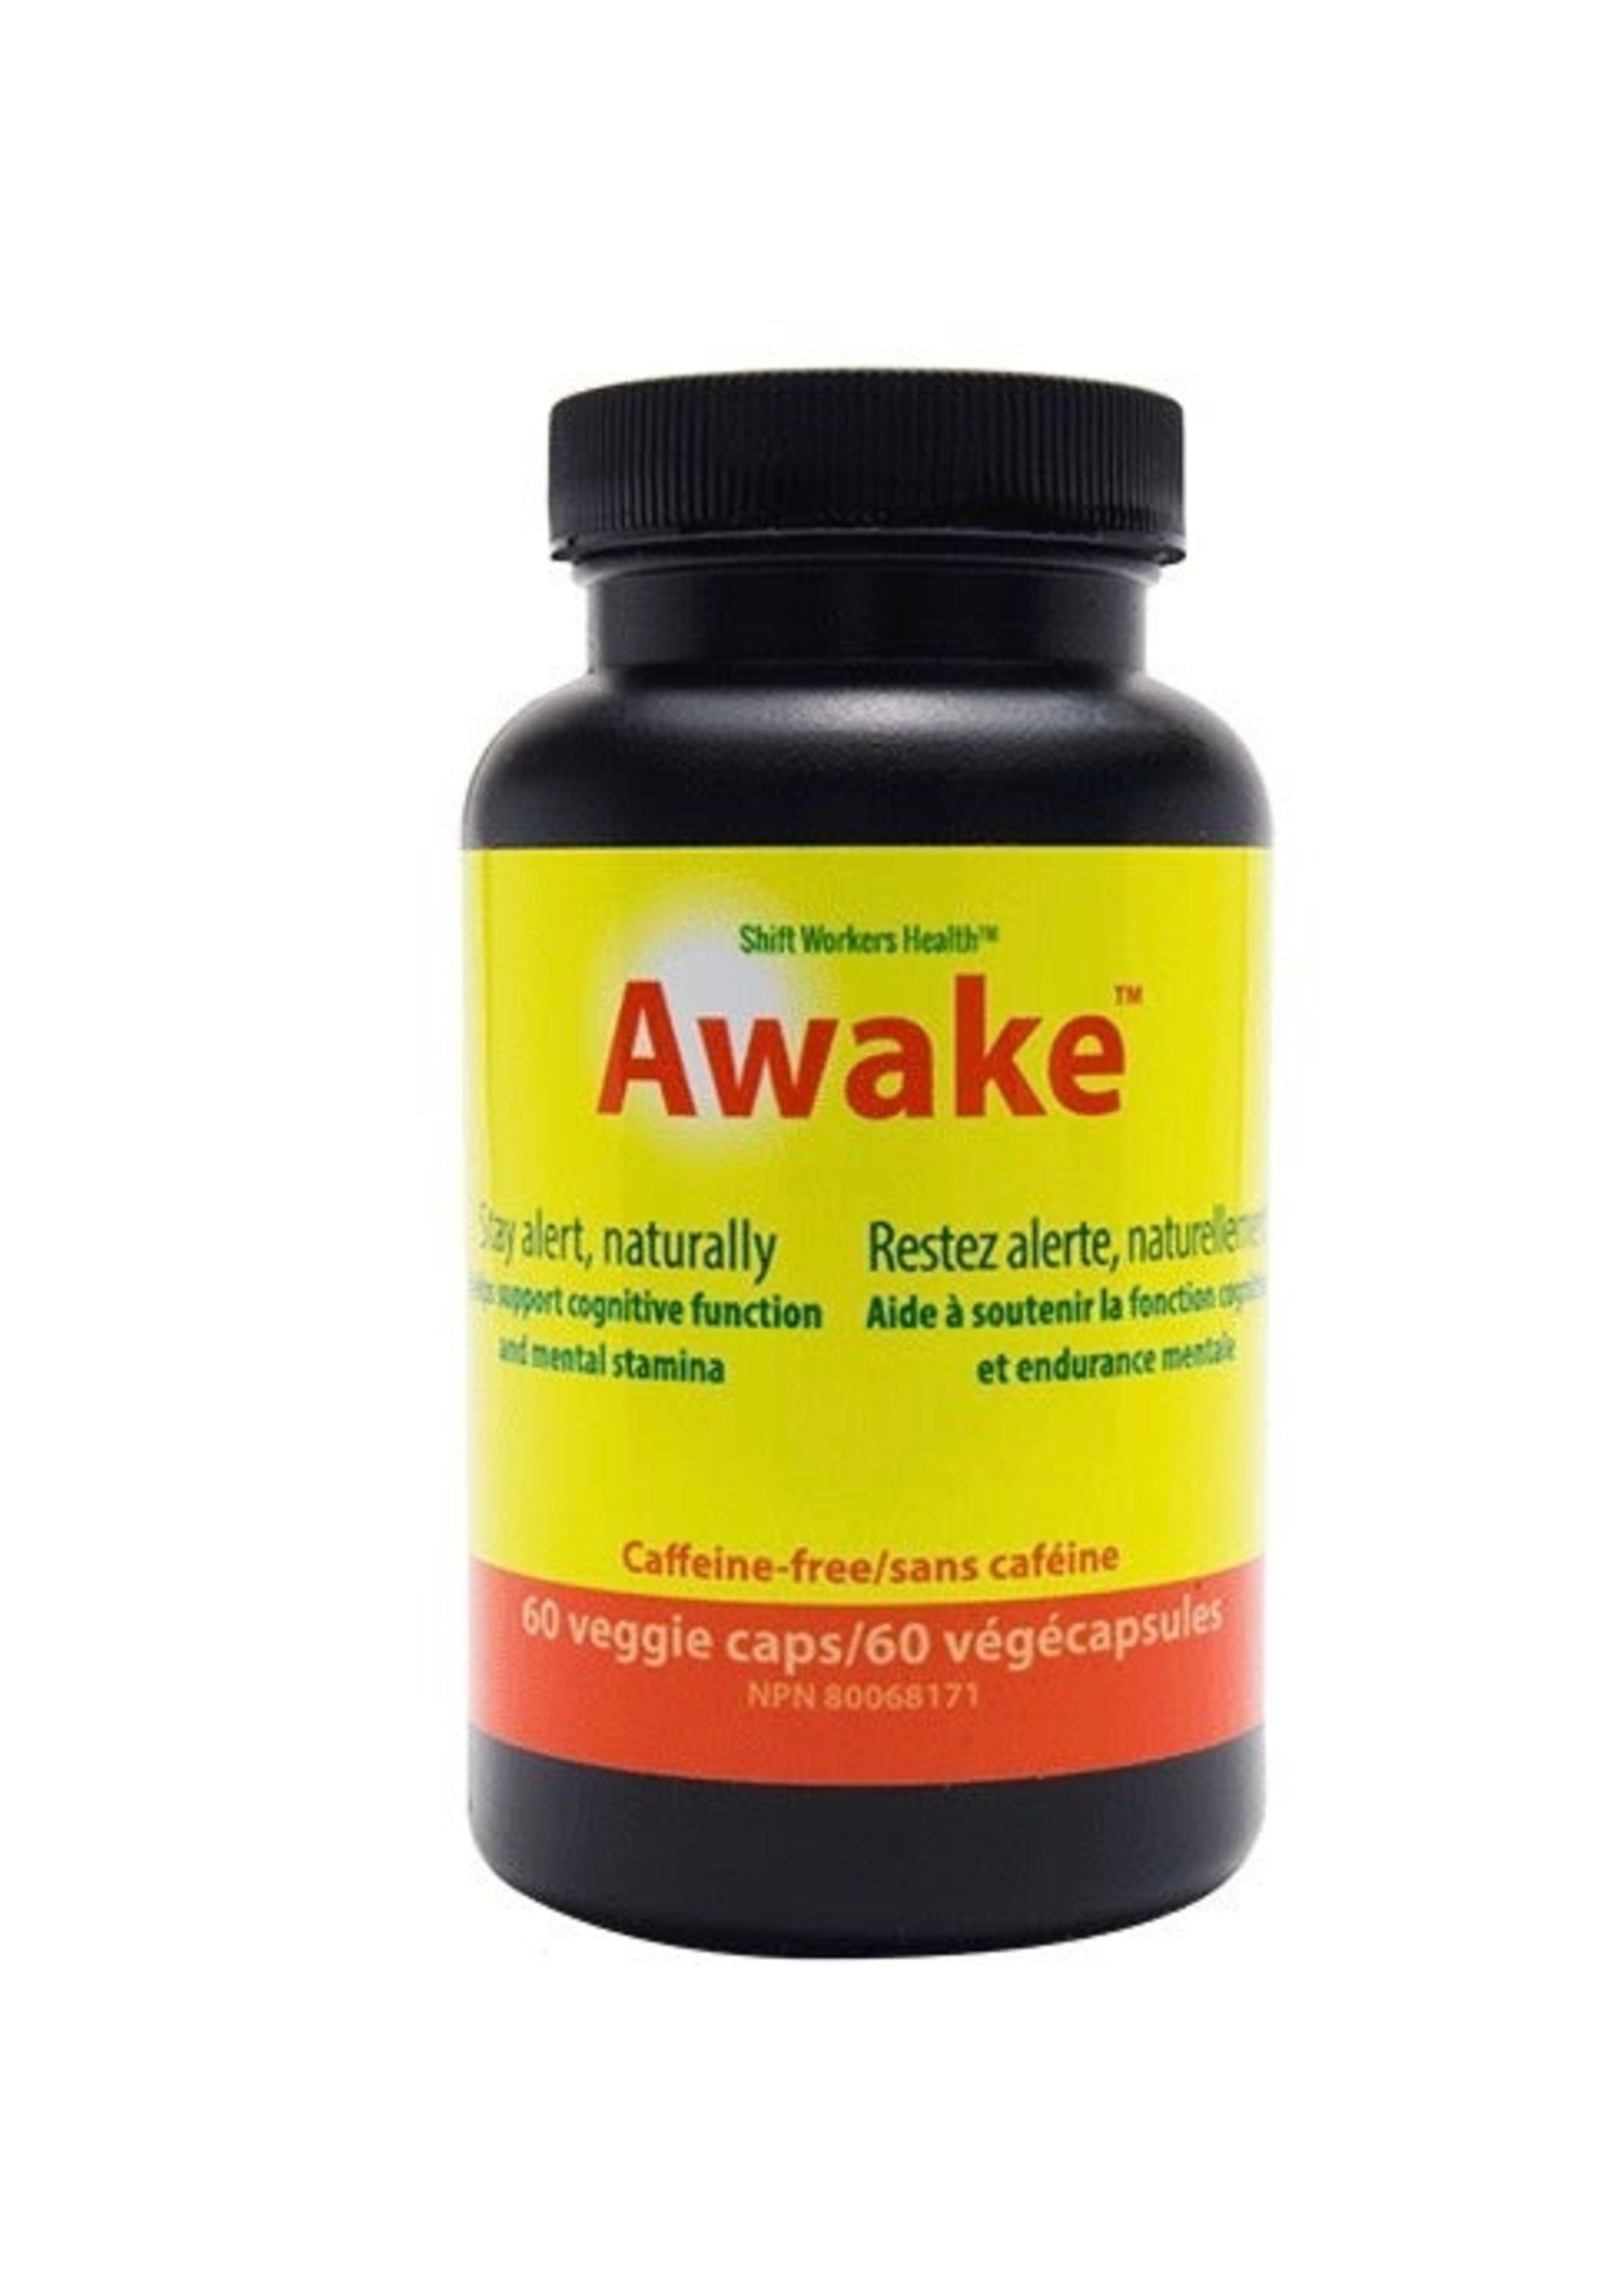 Shiftworkers Health Inc. Shiftworkers Health - Awake